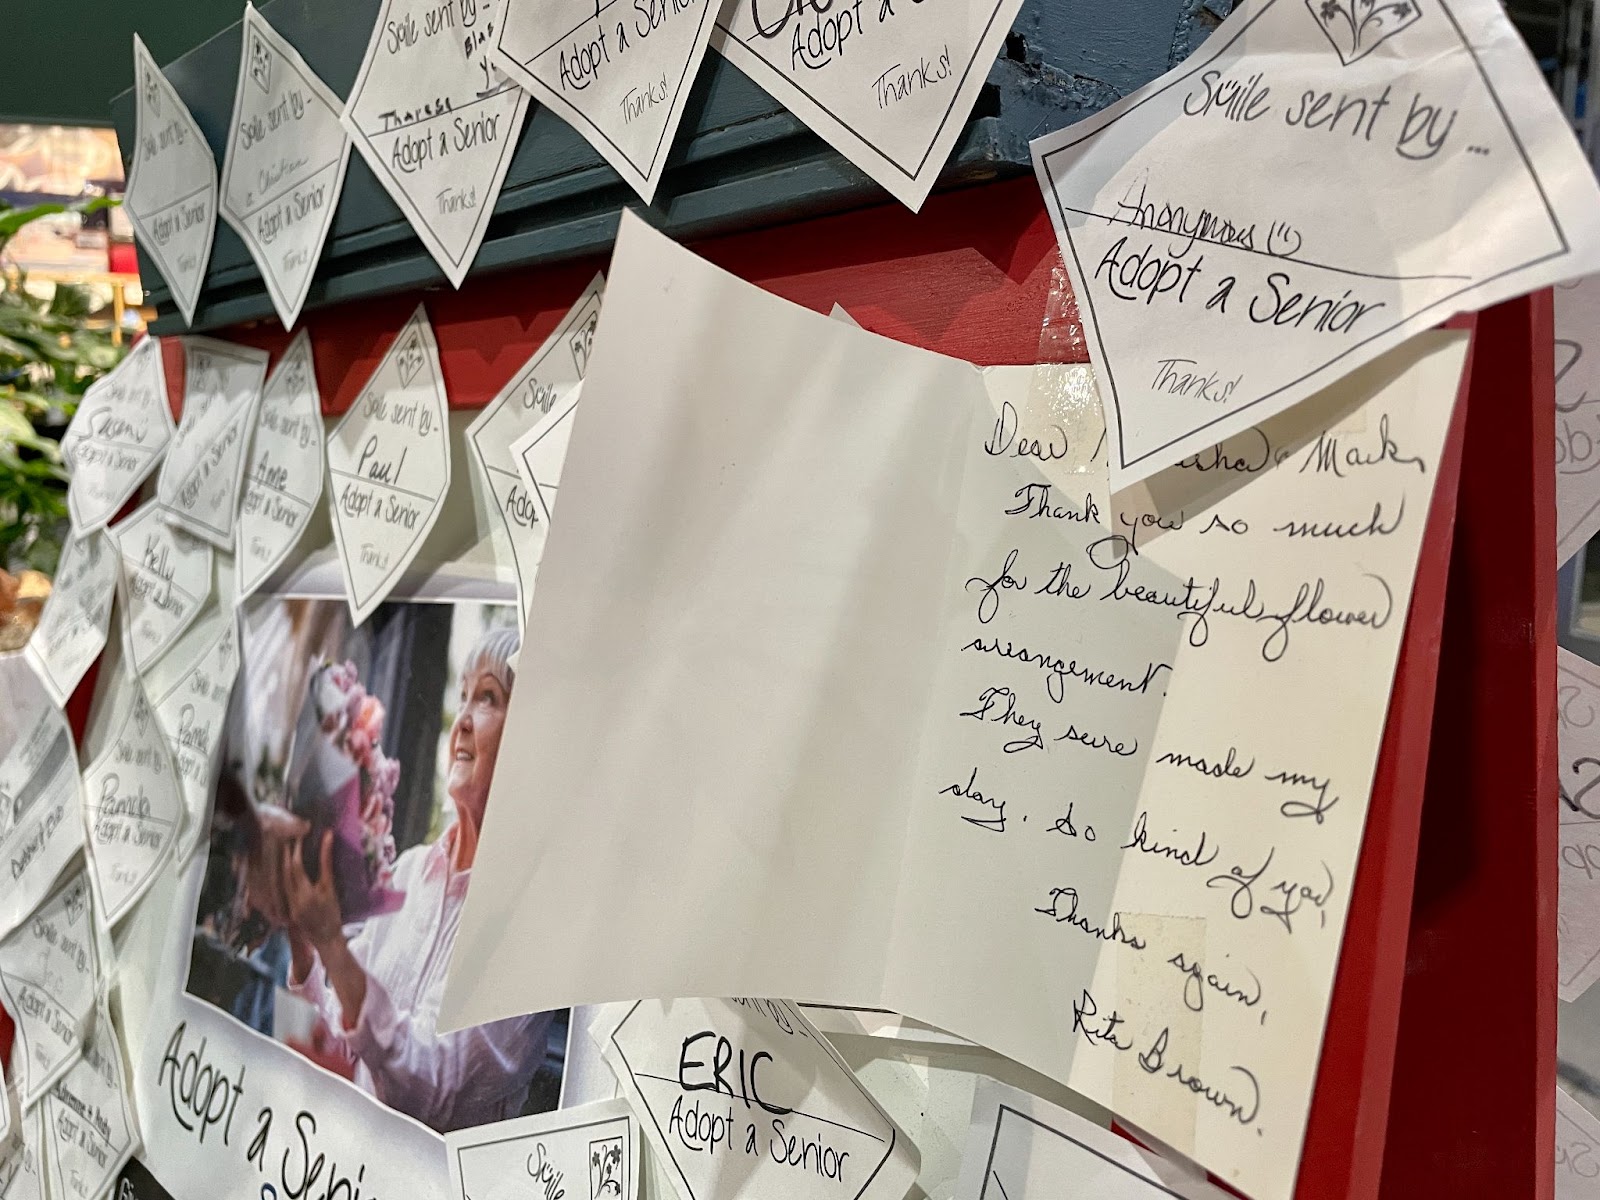 The board of customer notes and thank-you cards from seniors at Forget Me Not flower shop